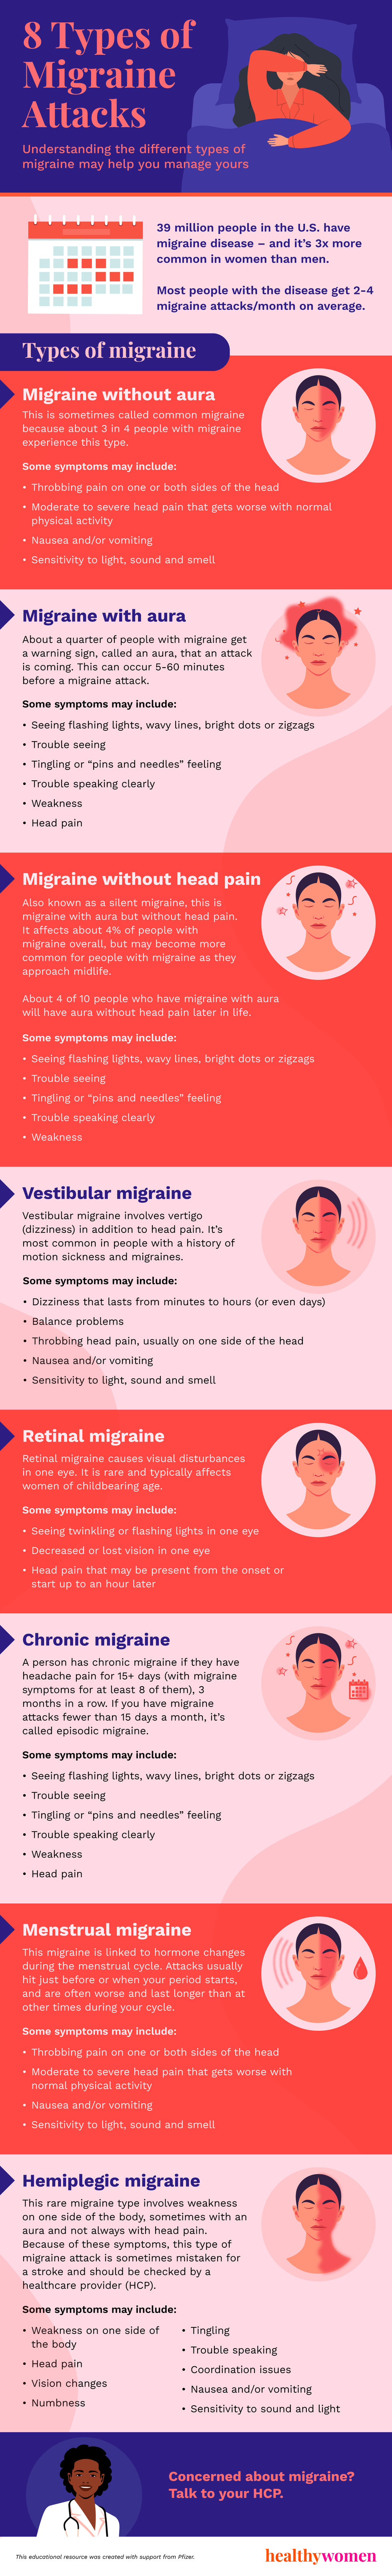 8 Types of Migraine Attacks Infographic, Click image to view PDF